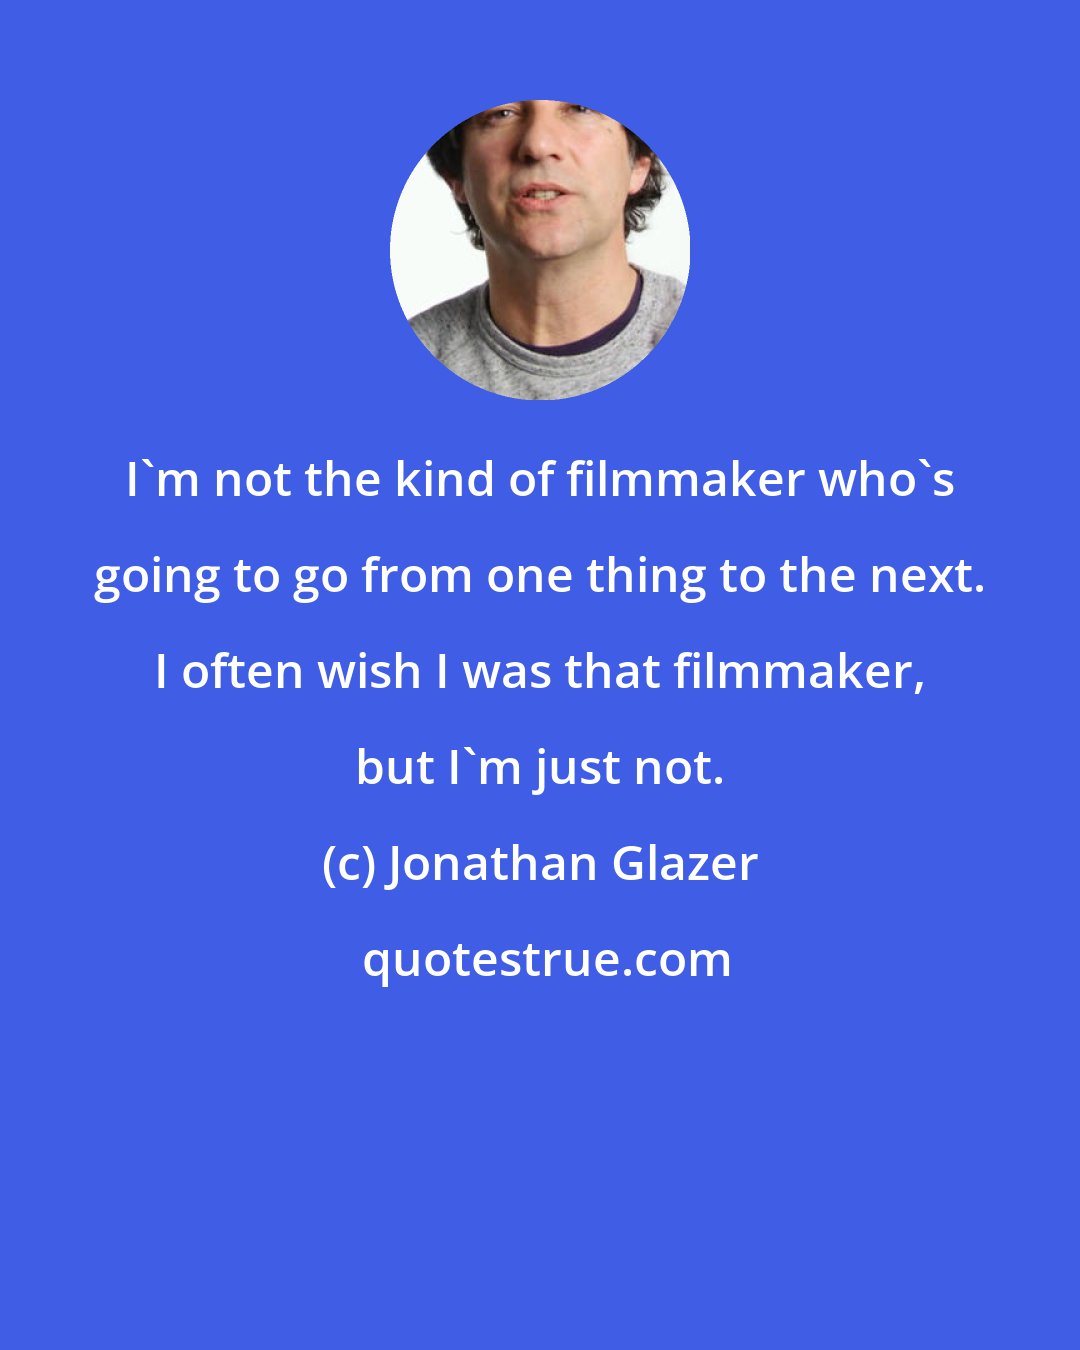 Jonathan Glazer: I'm not the kind of filmmaker who's going to go from one thing to the next. I often wish I was that filmmaker, but I'm just not.